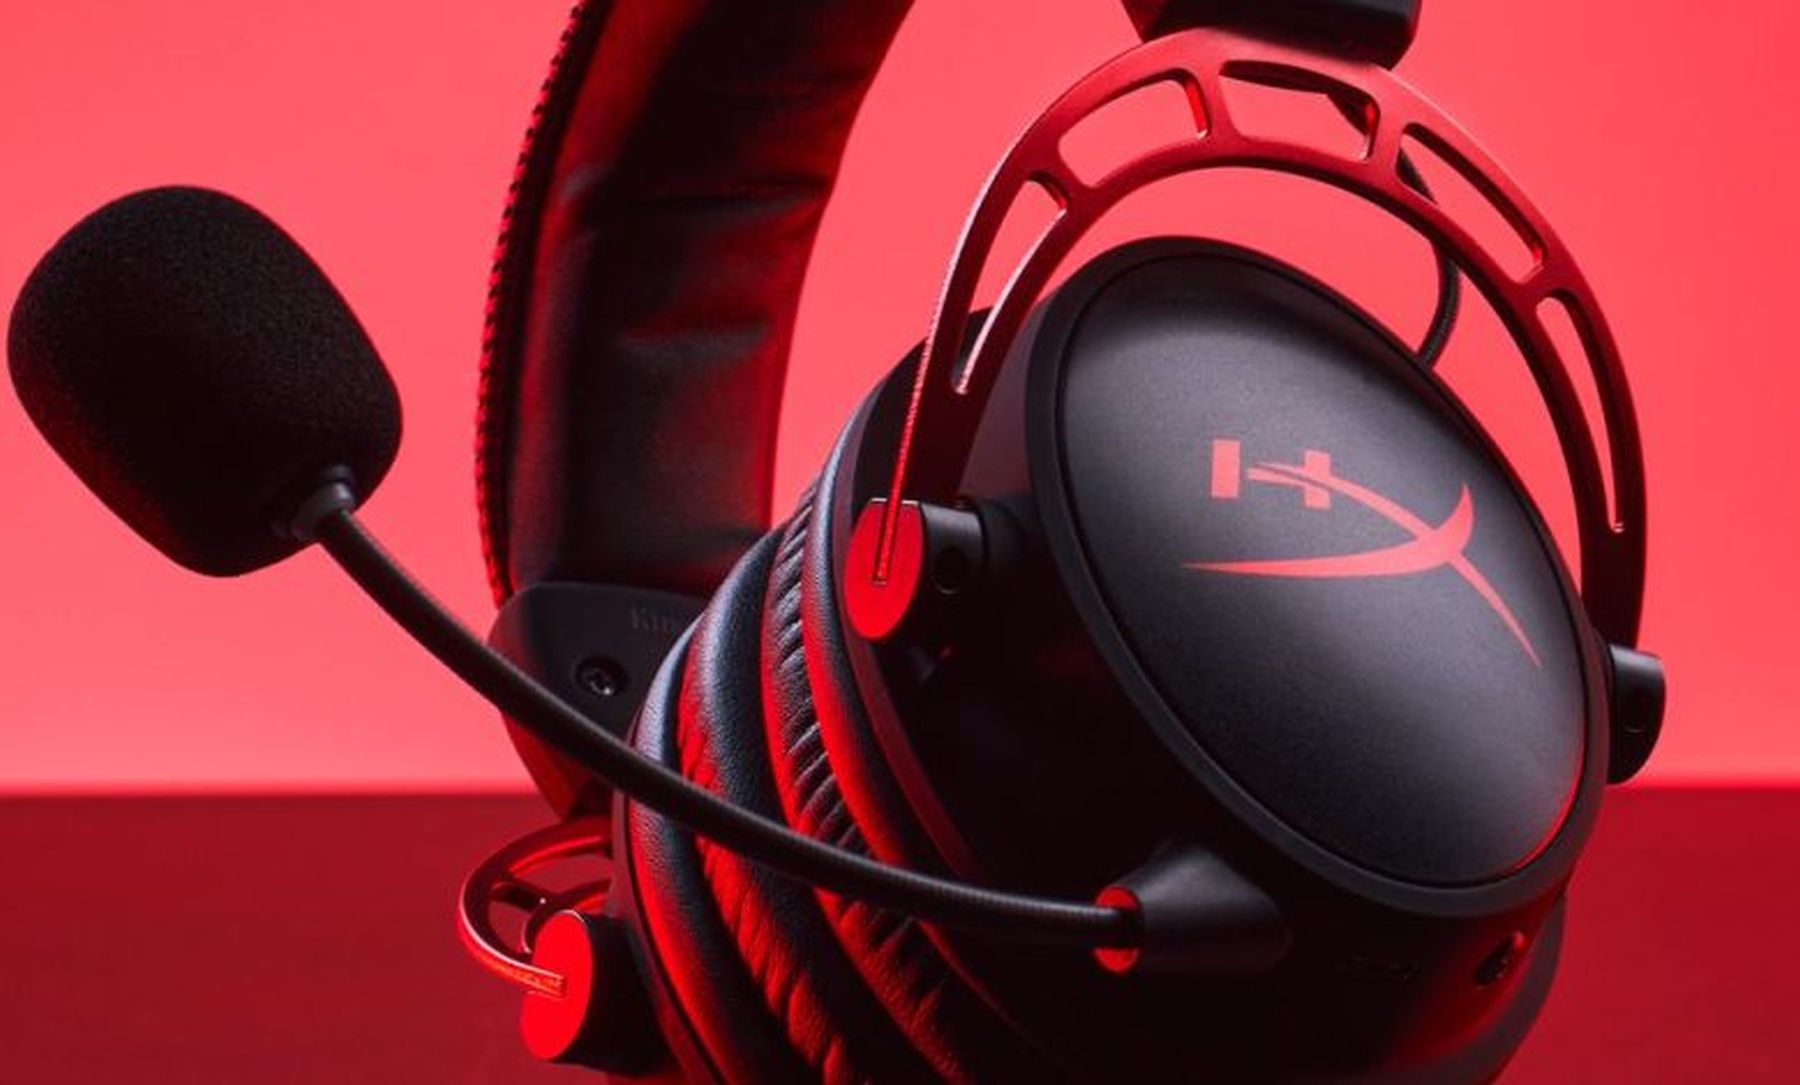 HyperX Cloud Alpha Wireless Gaming Headset with 300 hours of battery life is now available